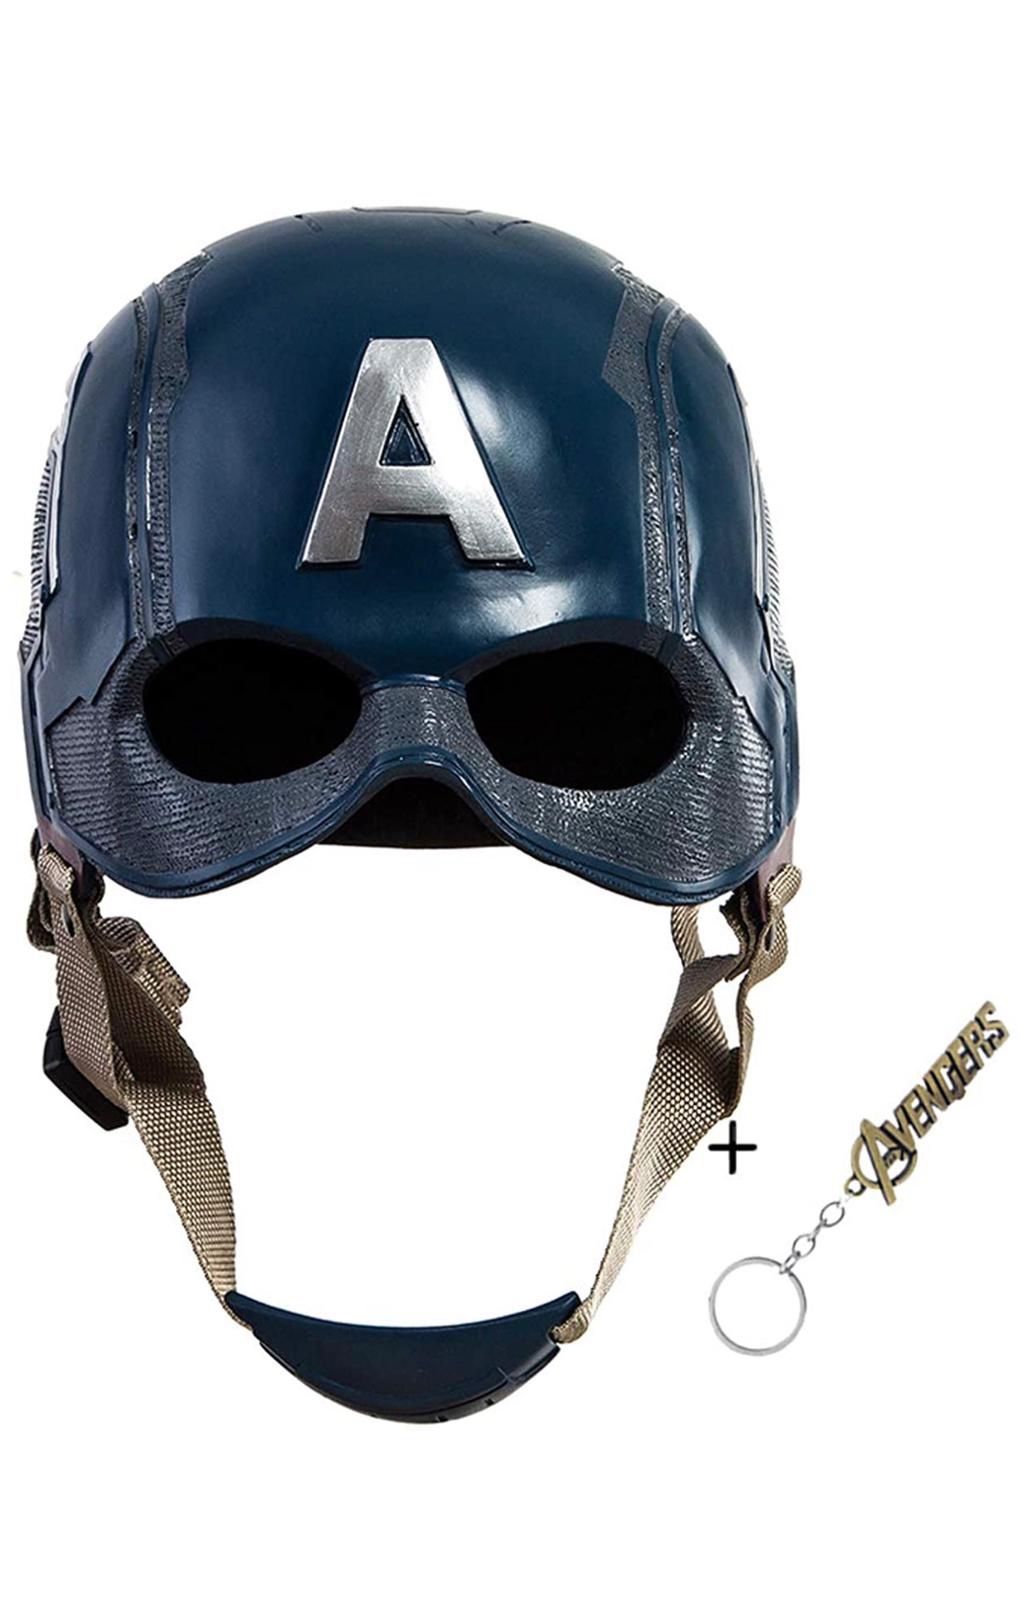 New Captain America 3 Civil War Helmet Movie Cosplay Props for Adult, Navy Blue, one size